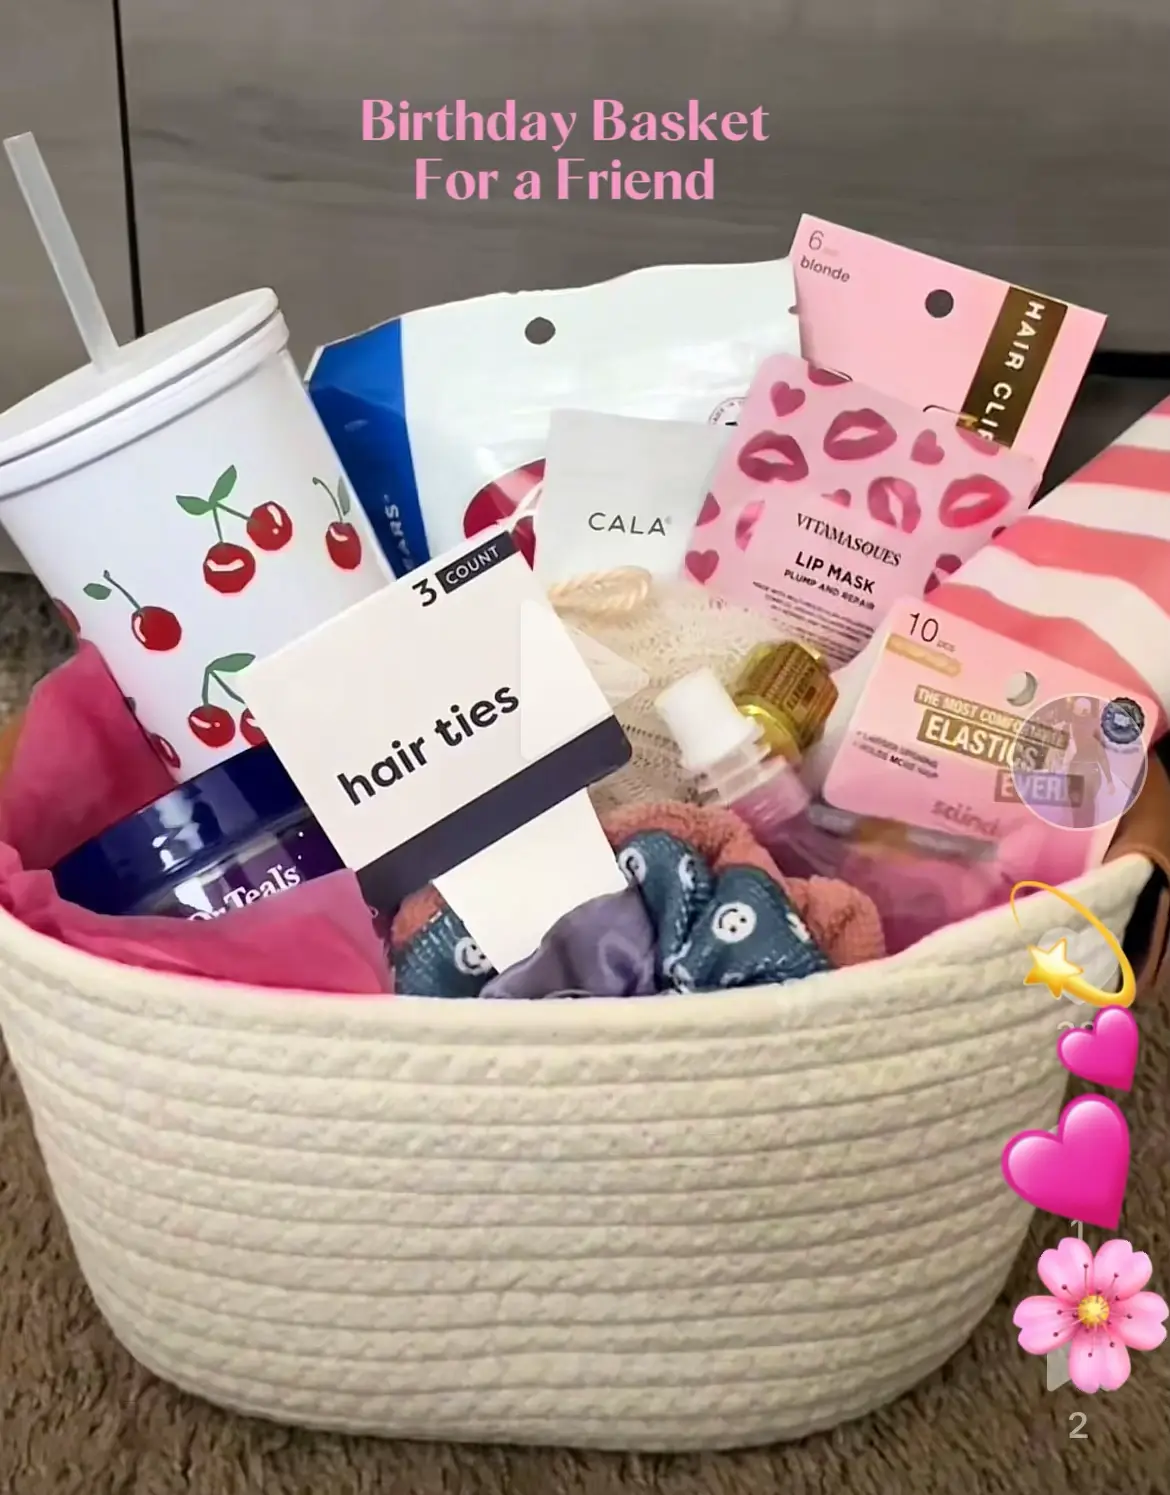 Replying to @brendarachell what I put in my besties gift basket